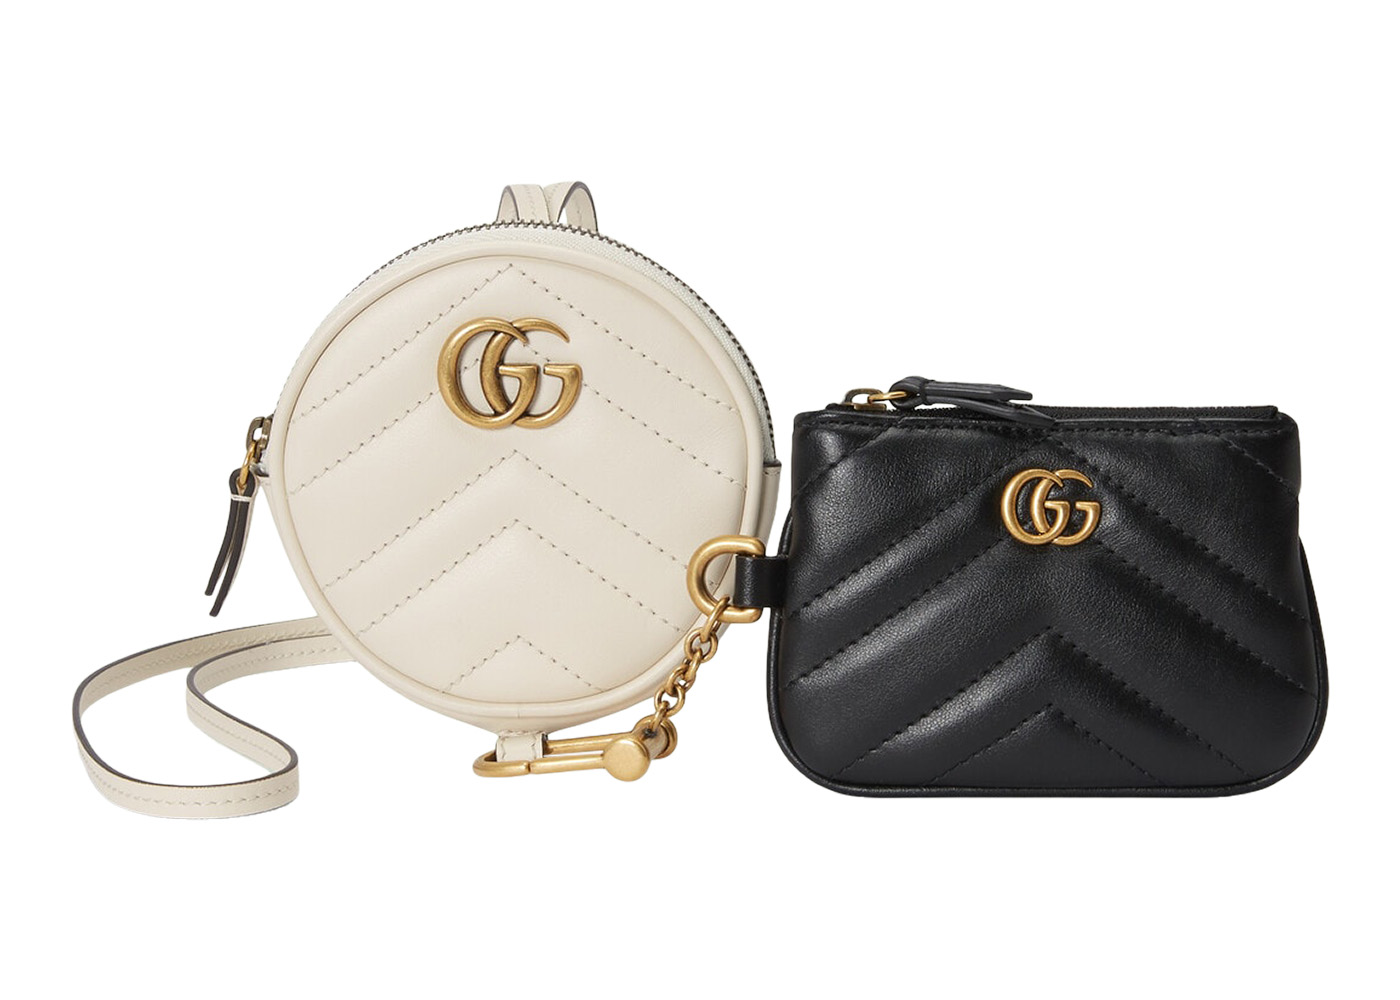 Gucci GG Marmont Small Matelasse Shoulder Bag in Beige